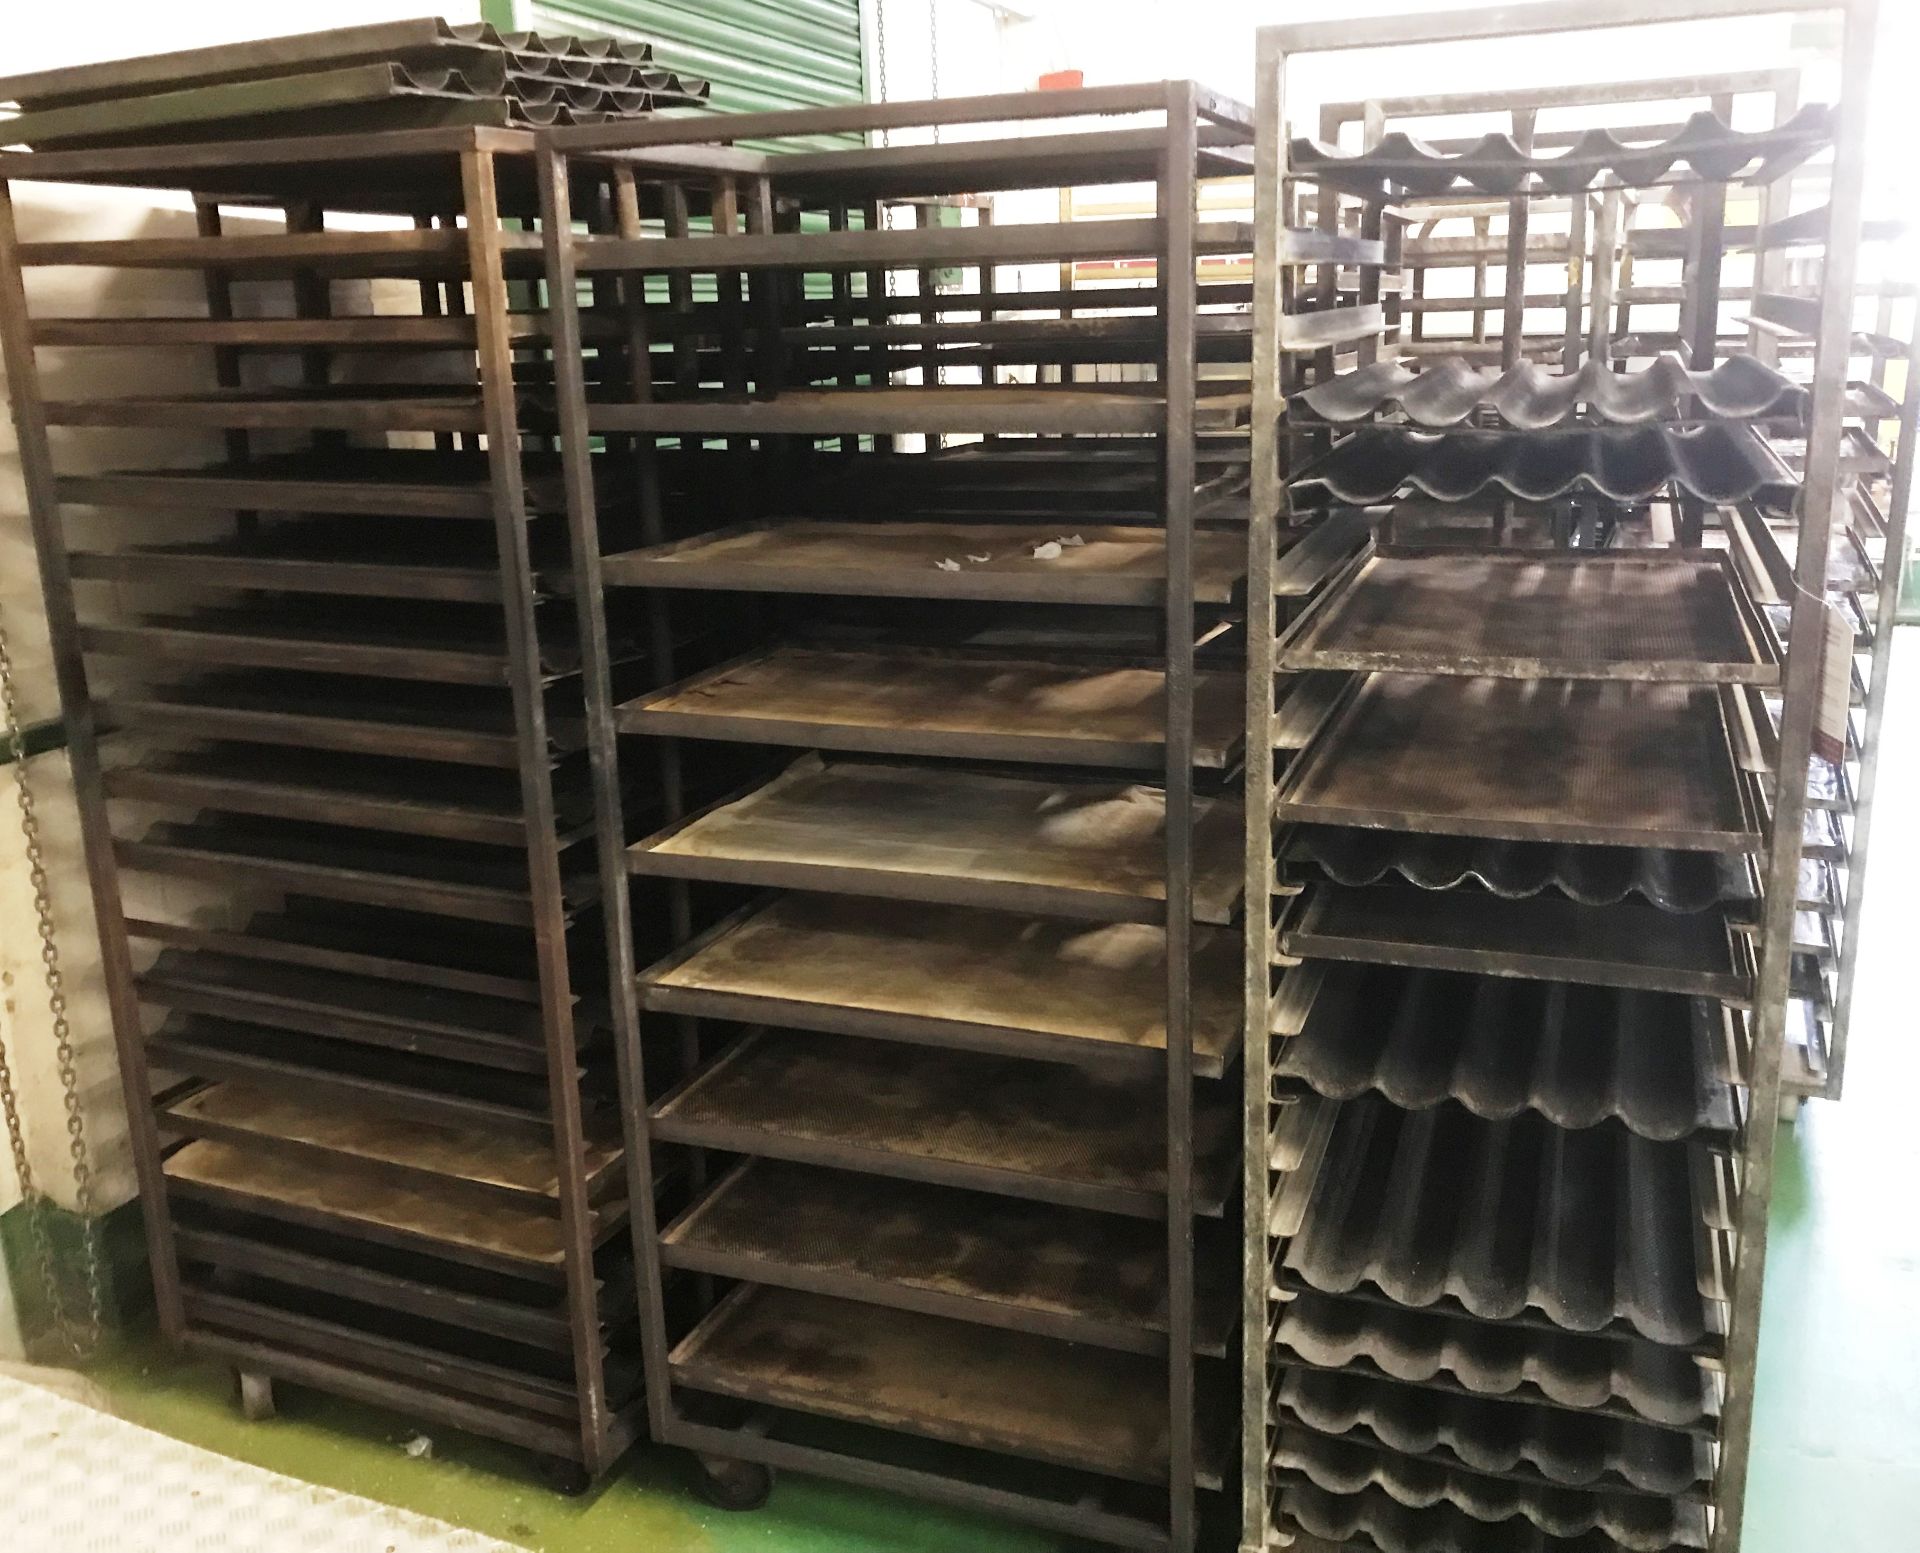 12 x Various Bakery Racks - As Pictured - Image 2 of 3